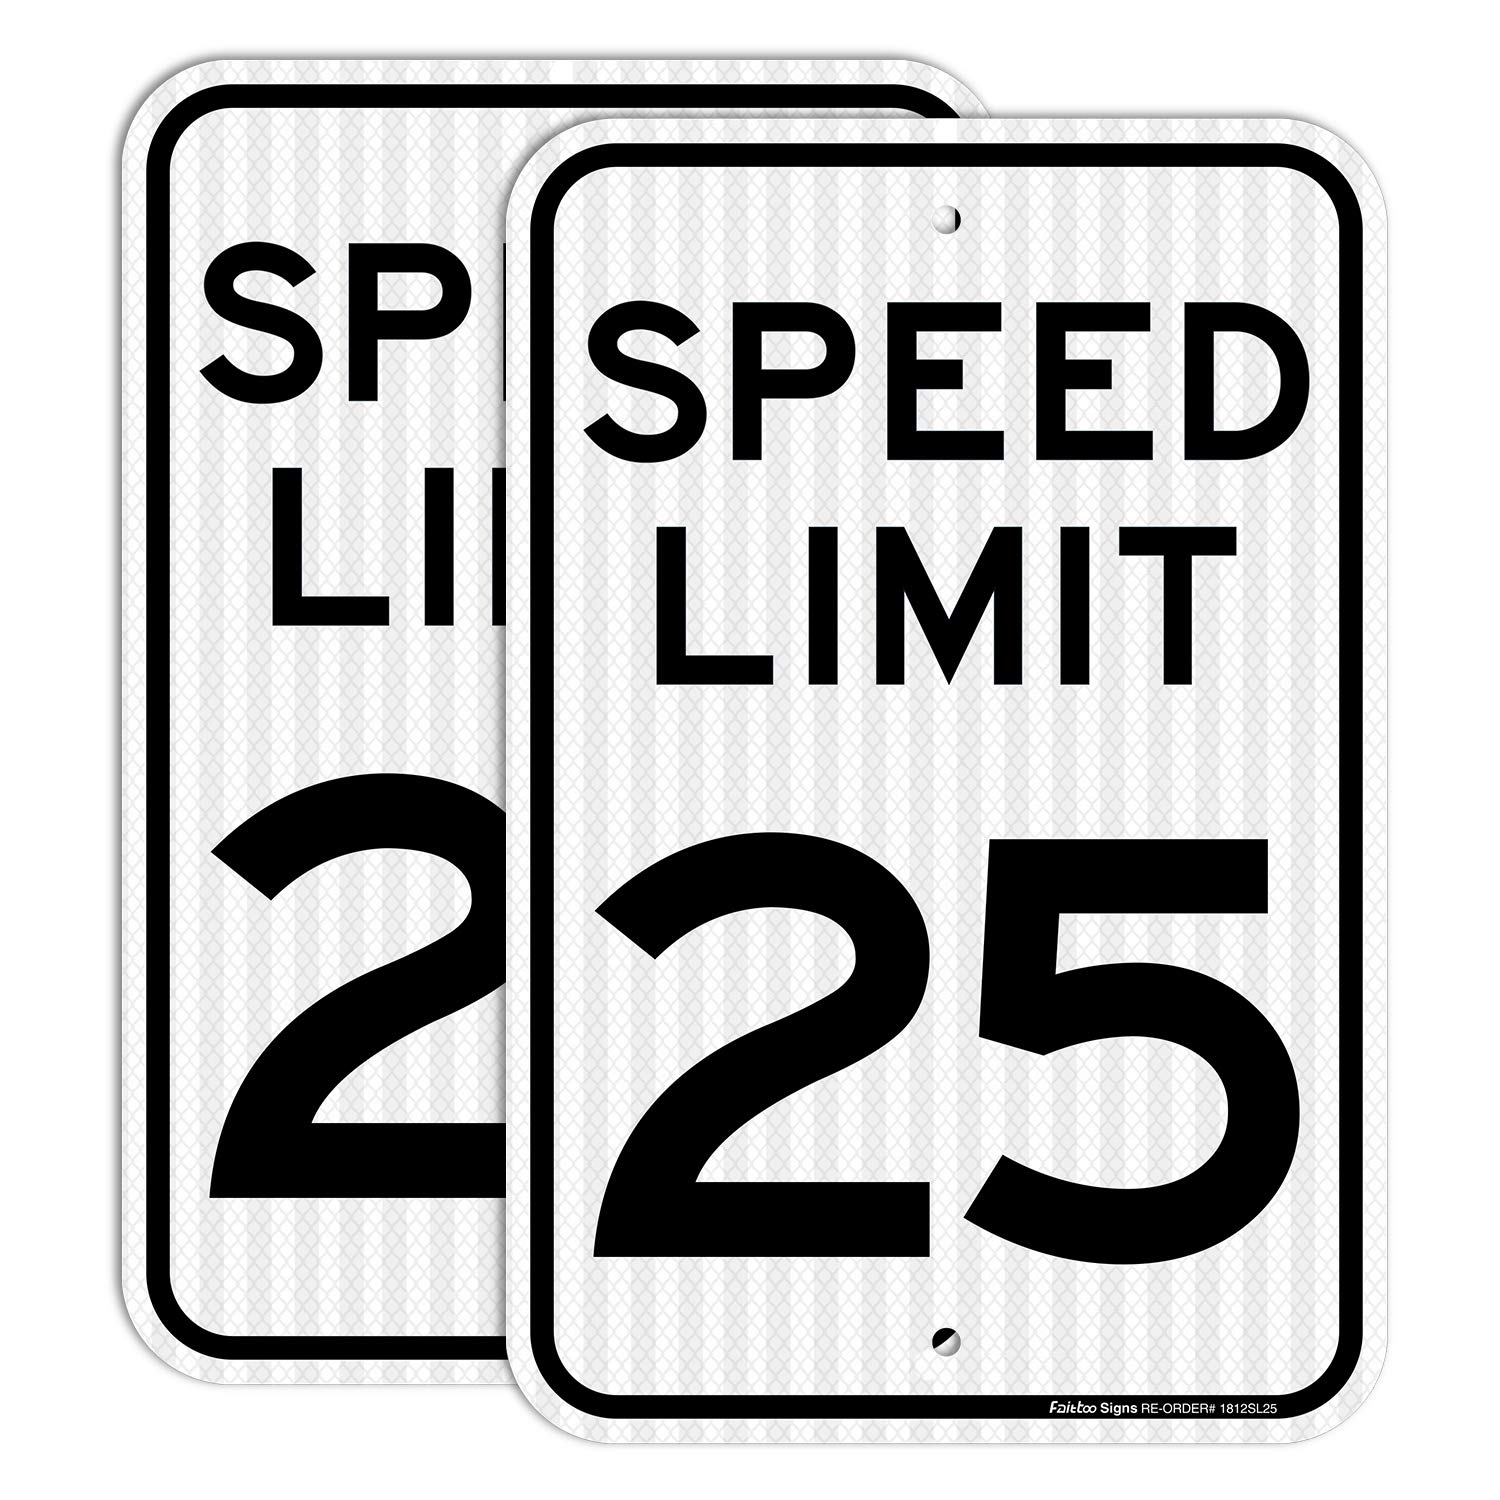 (2 Pack) Speed Limit 25 MPH Sign, Slow Down Sign, Traffic Sign,18 x 12 Inches Engineer Grade Reflective Sheeting, Rust Free Aluminum, Weather Resistant, Waterproof, Durable Ink, Easy to Mount